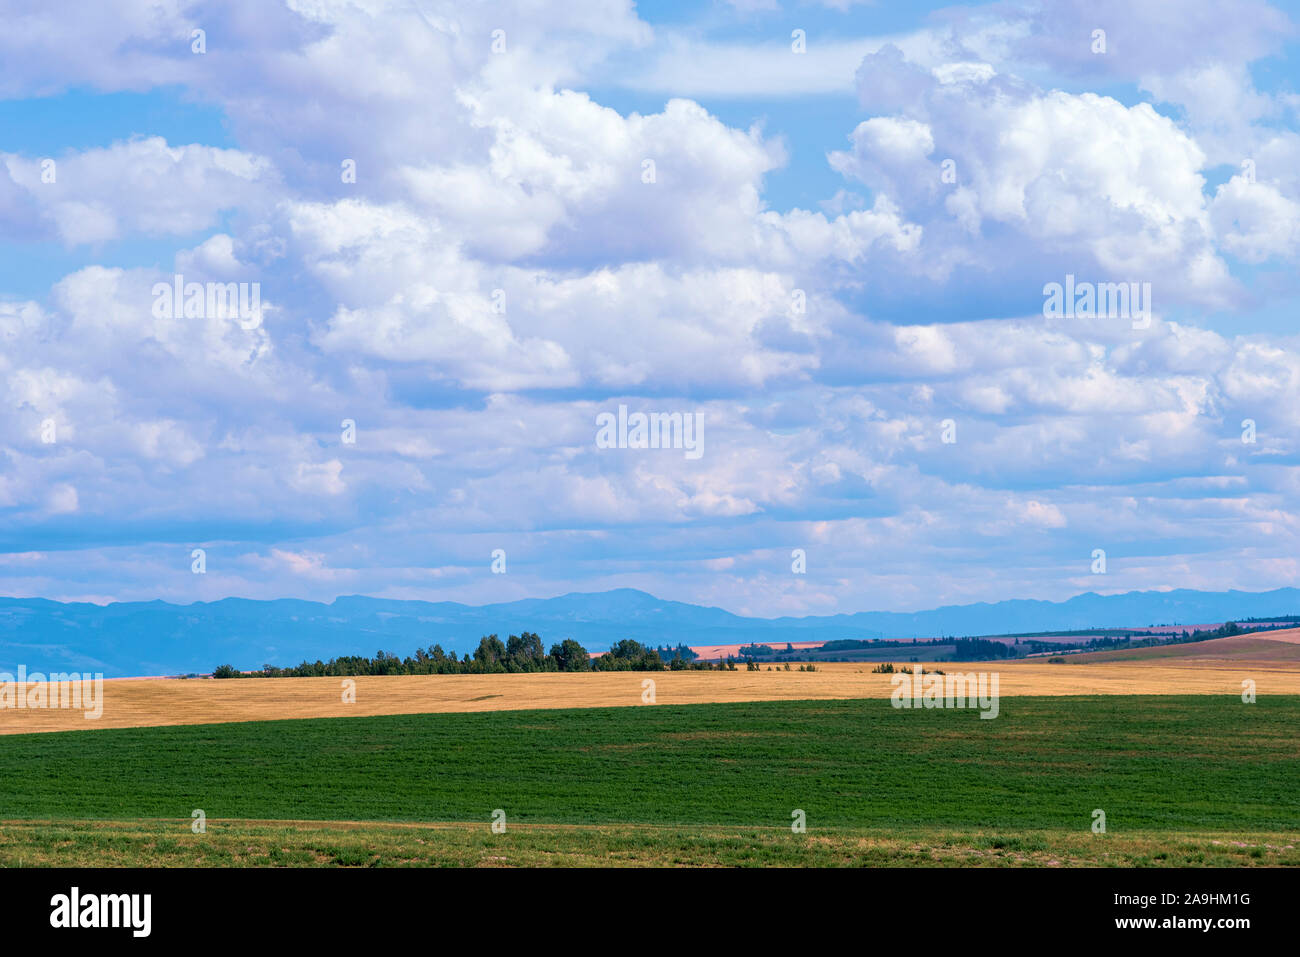 Looking out over golden and green farming fields with distant mountains under a blue sky with white fluffy clouds. Stock Photo